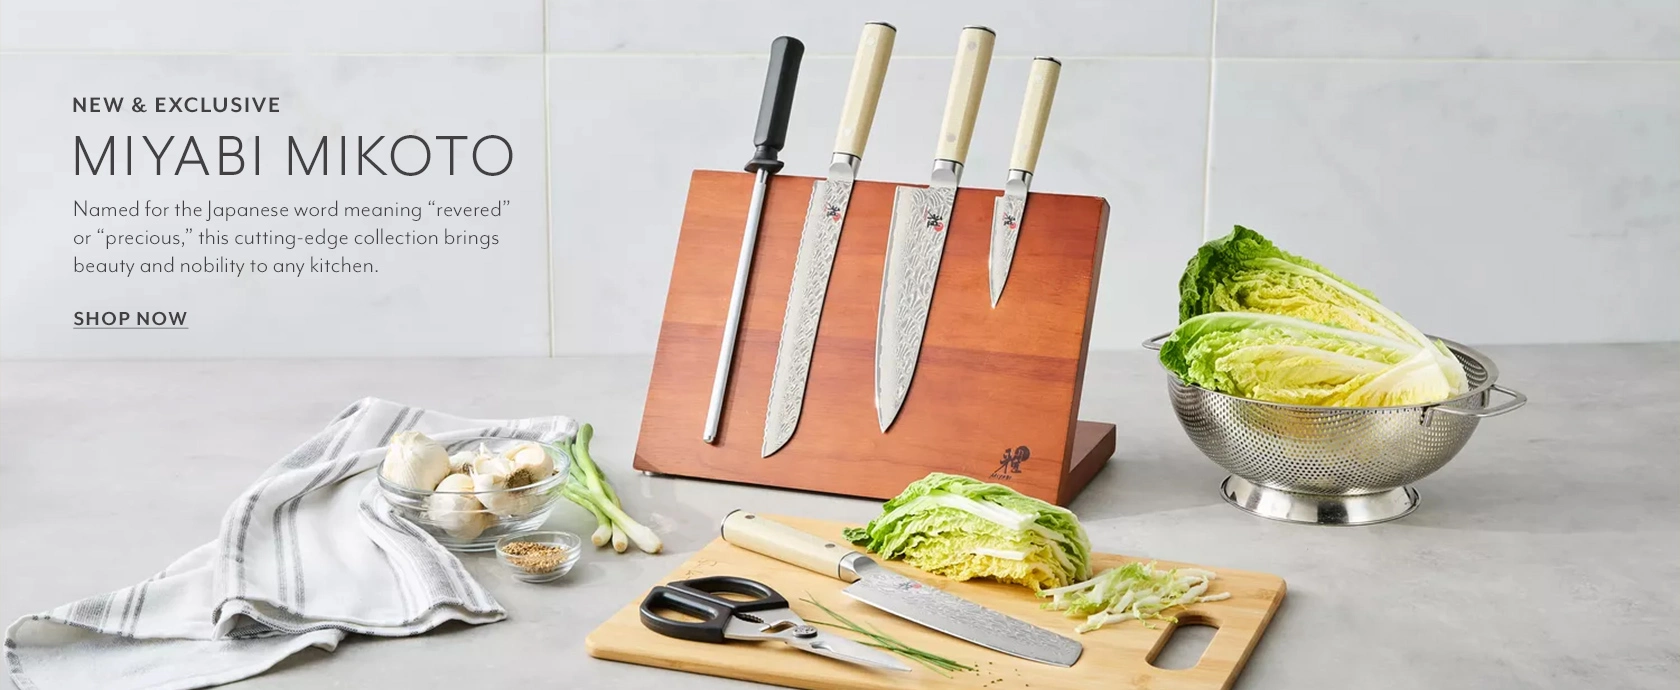 New & Exclusive Miyabi Mikoto. Named for the Japanese word meaning revered or precious, this cutting-edge collection brings beauty and nobility to any kitchen. Shop Now.